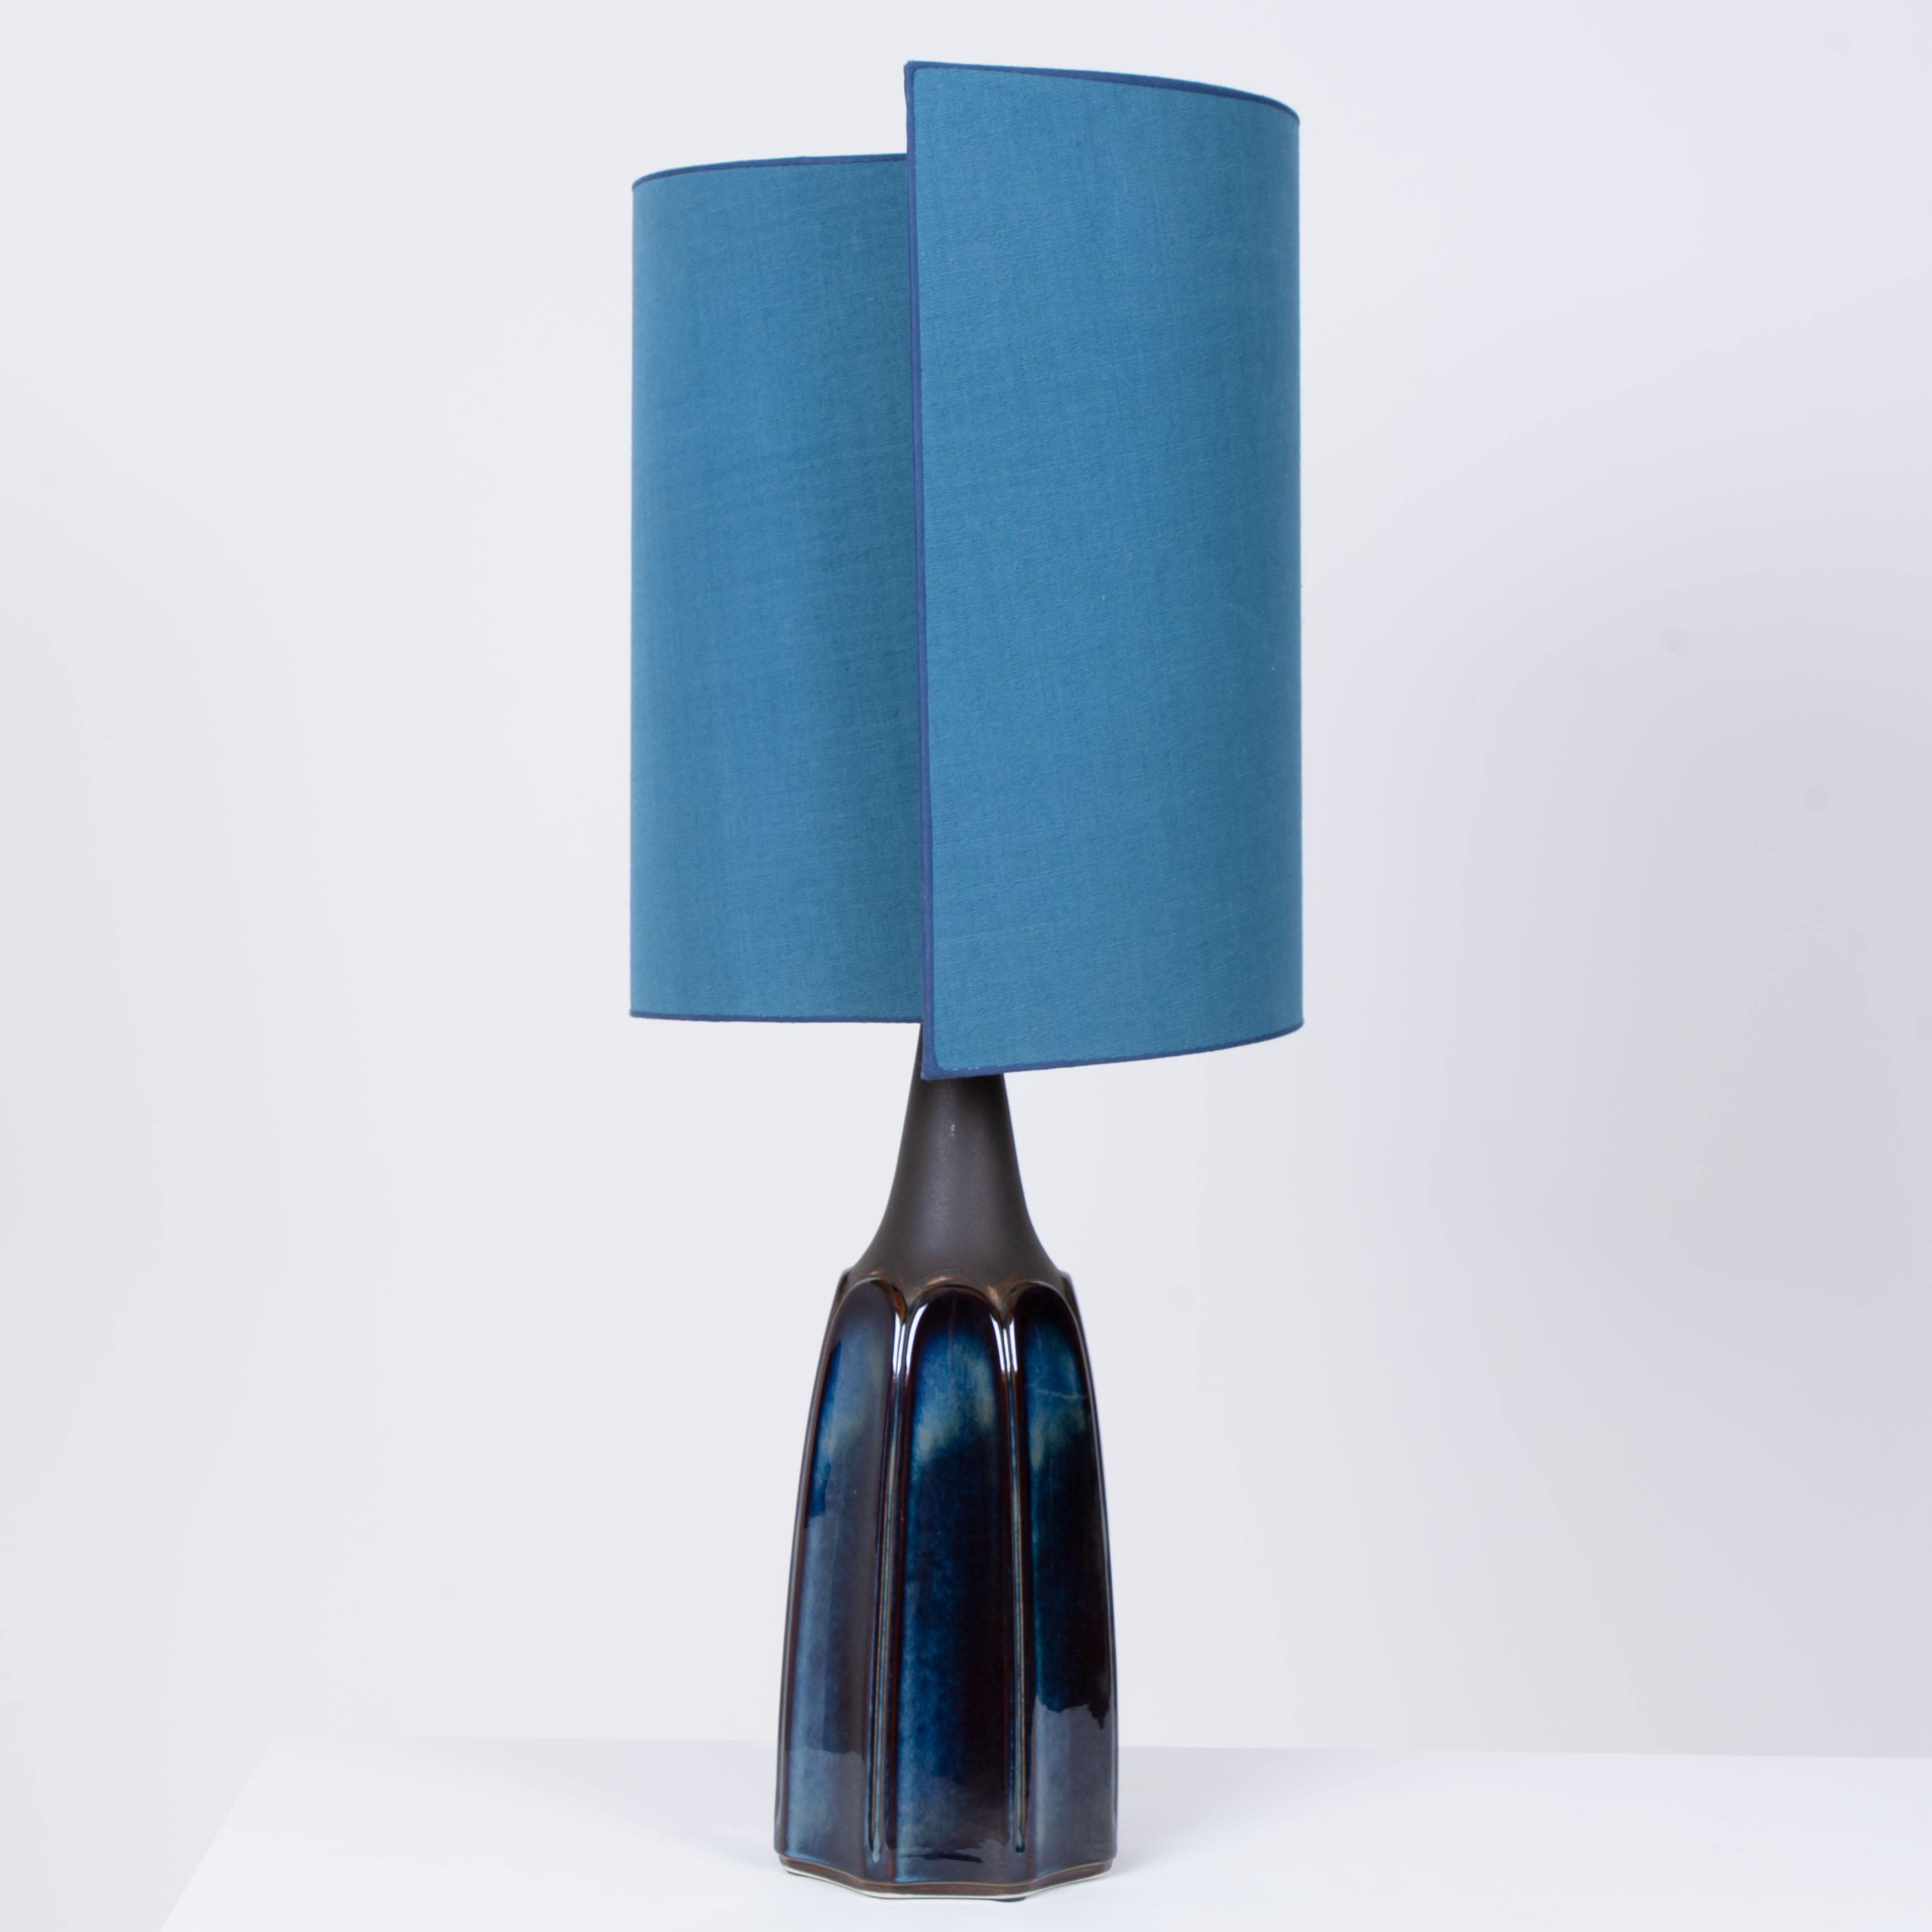 An exceptional ceramic table lamp by Soholm, Denmark, 1960s. A high-end sculptural pieces made of handmade ceramic in blue and grey tones, with a combination of dry and glazed finishes. With a special new custom made blue silk lamp shade by René